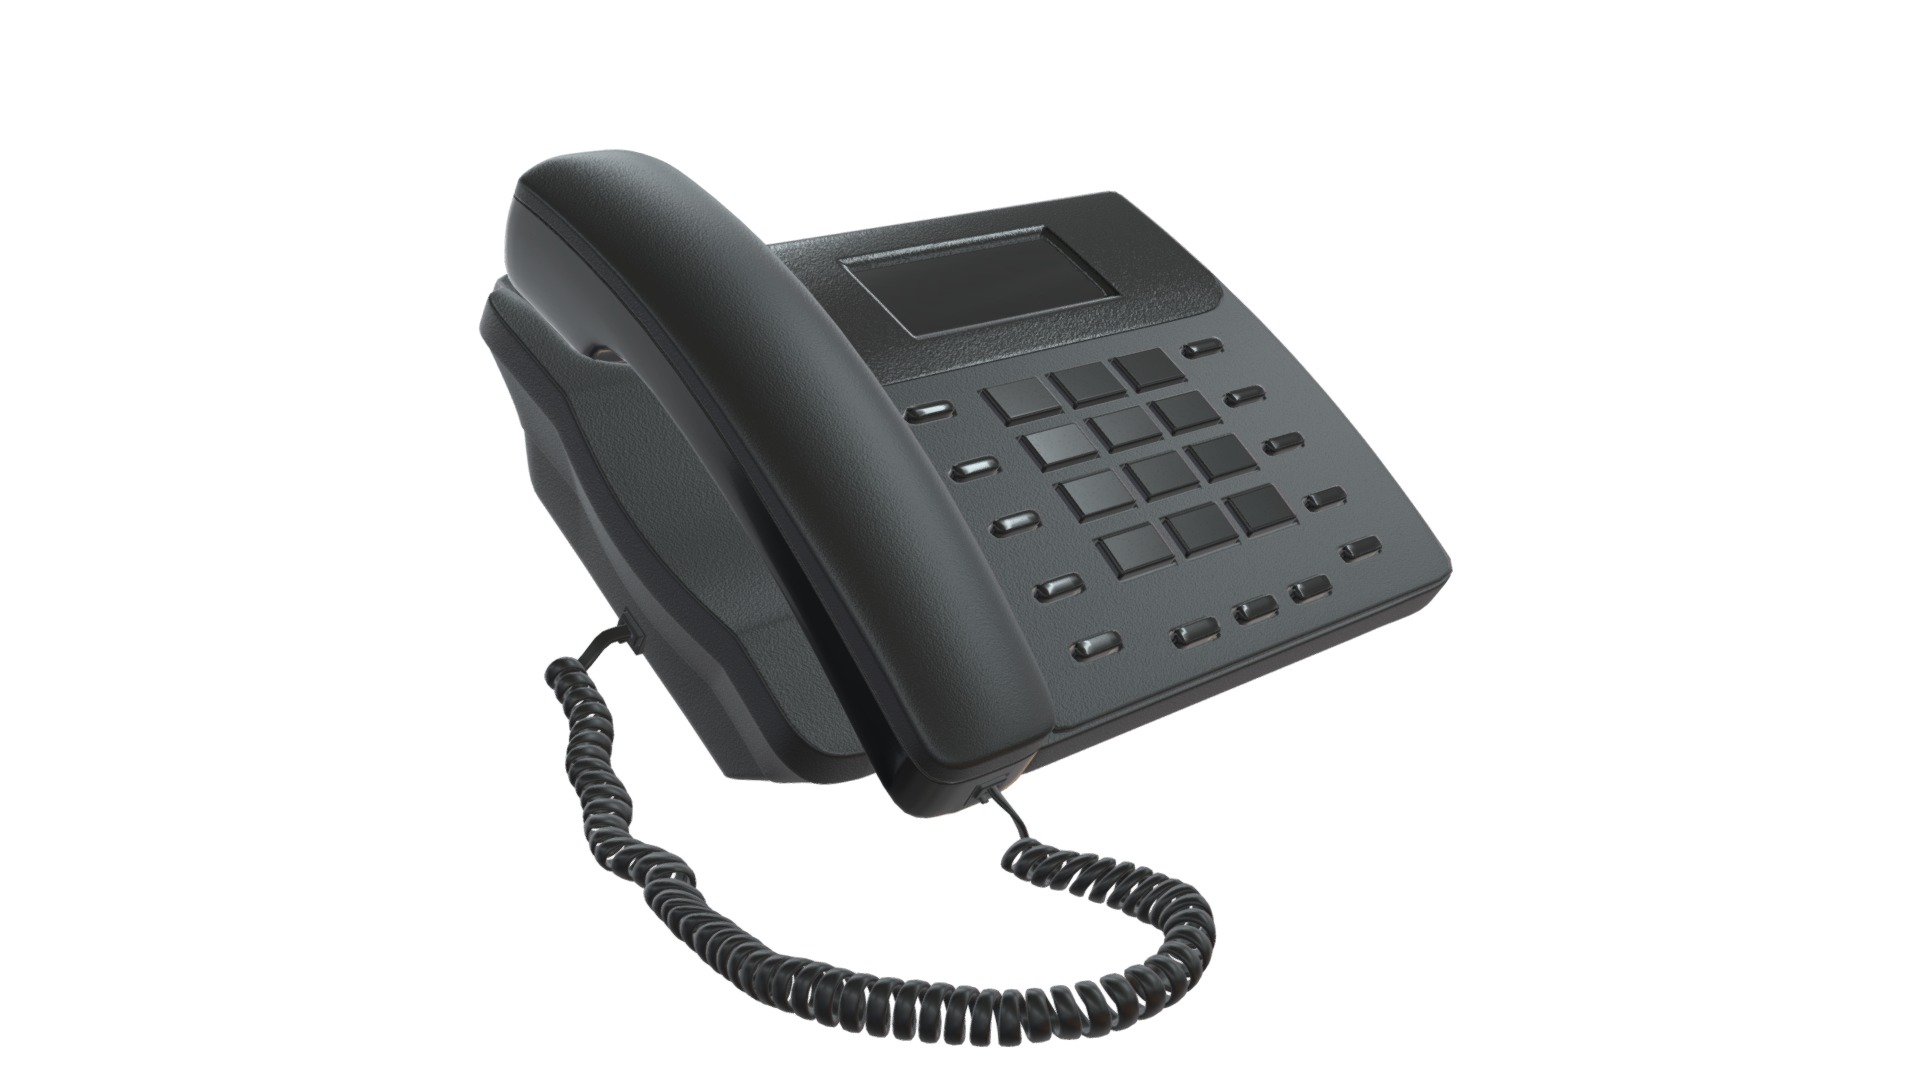 3D model Office button phone - This is a 3D model of the Office button phone. The 3D model is about a black computer mouse.